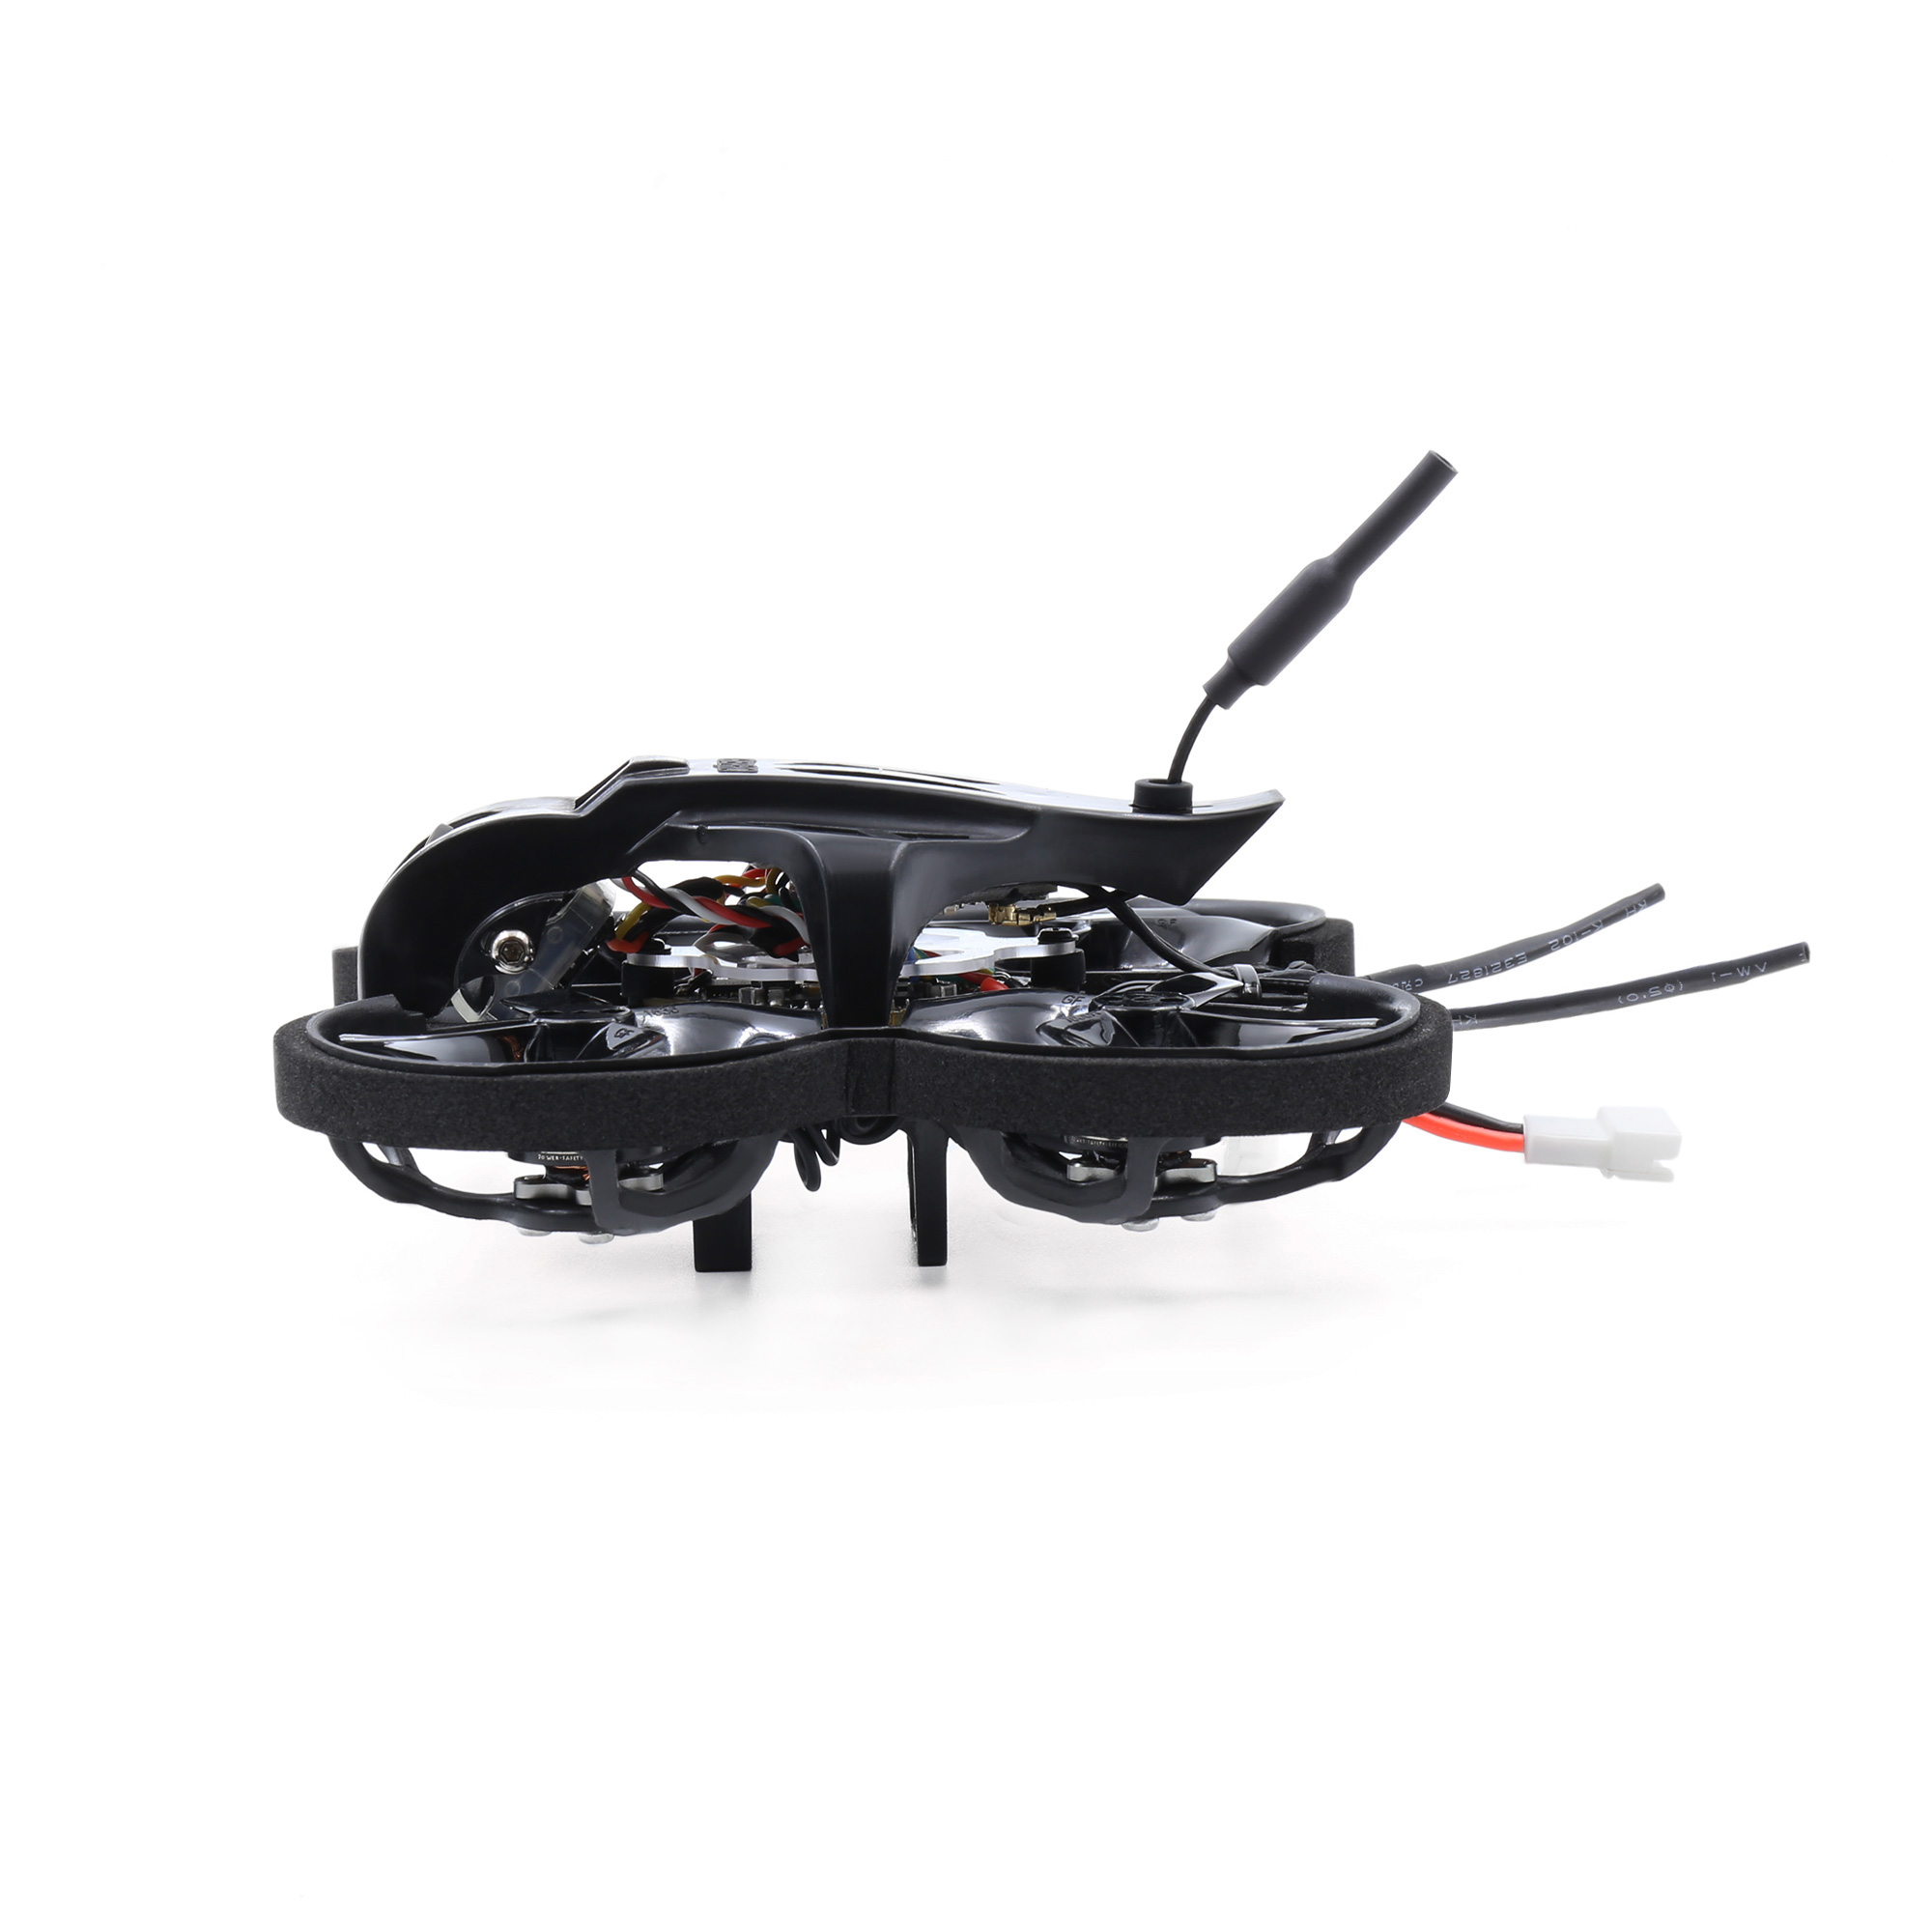 GEPRC-TinyGO-16inch-2S-FPV-Indoor-Whoop-Runcam-Nano2-GR8-Remote-ControllerRG1-Goggles-RTF-Ready-To-F-1788771-8